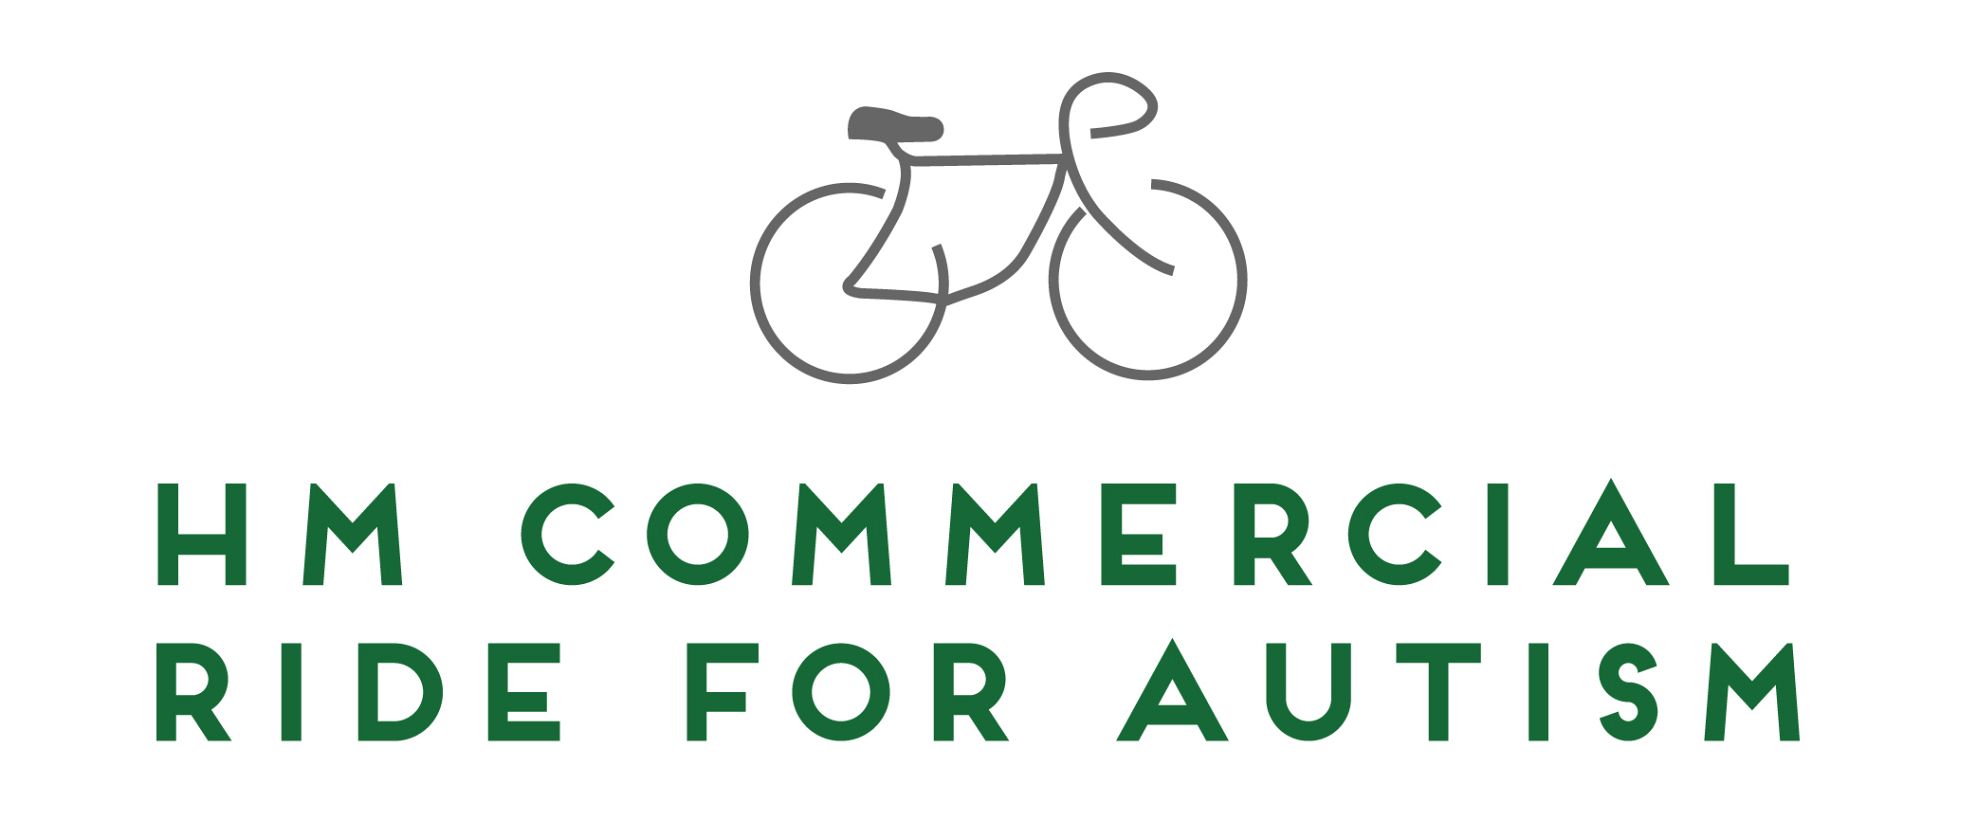 Join us for the 2022 HM Commercial Ride for Autism